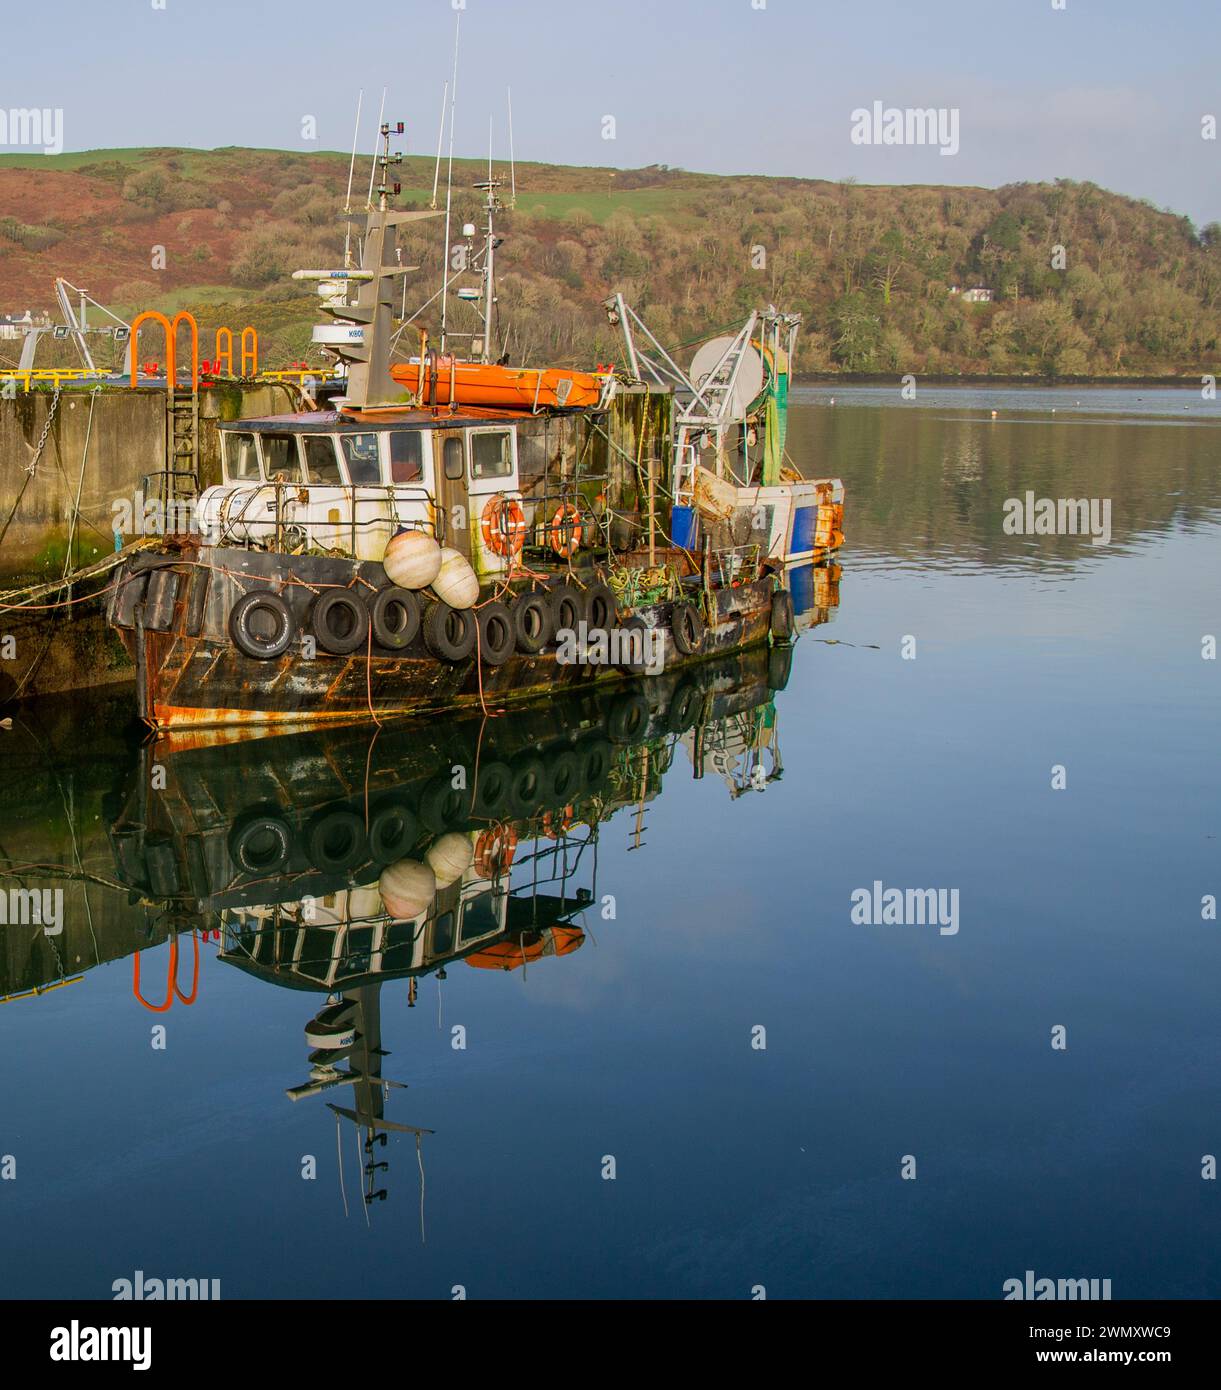 Old tug boat with reflection in flat calm waters Stock Photo